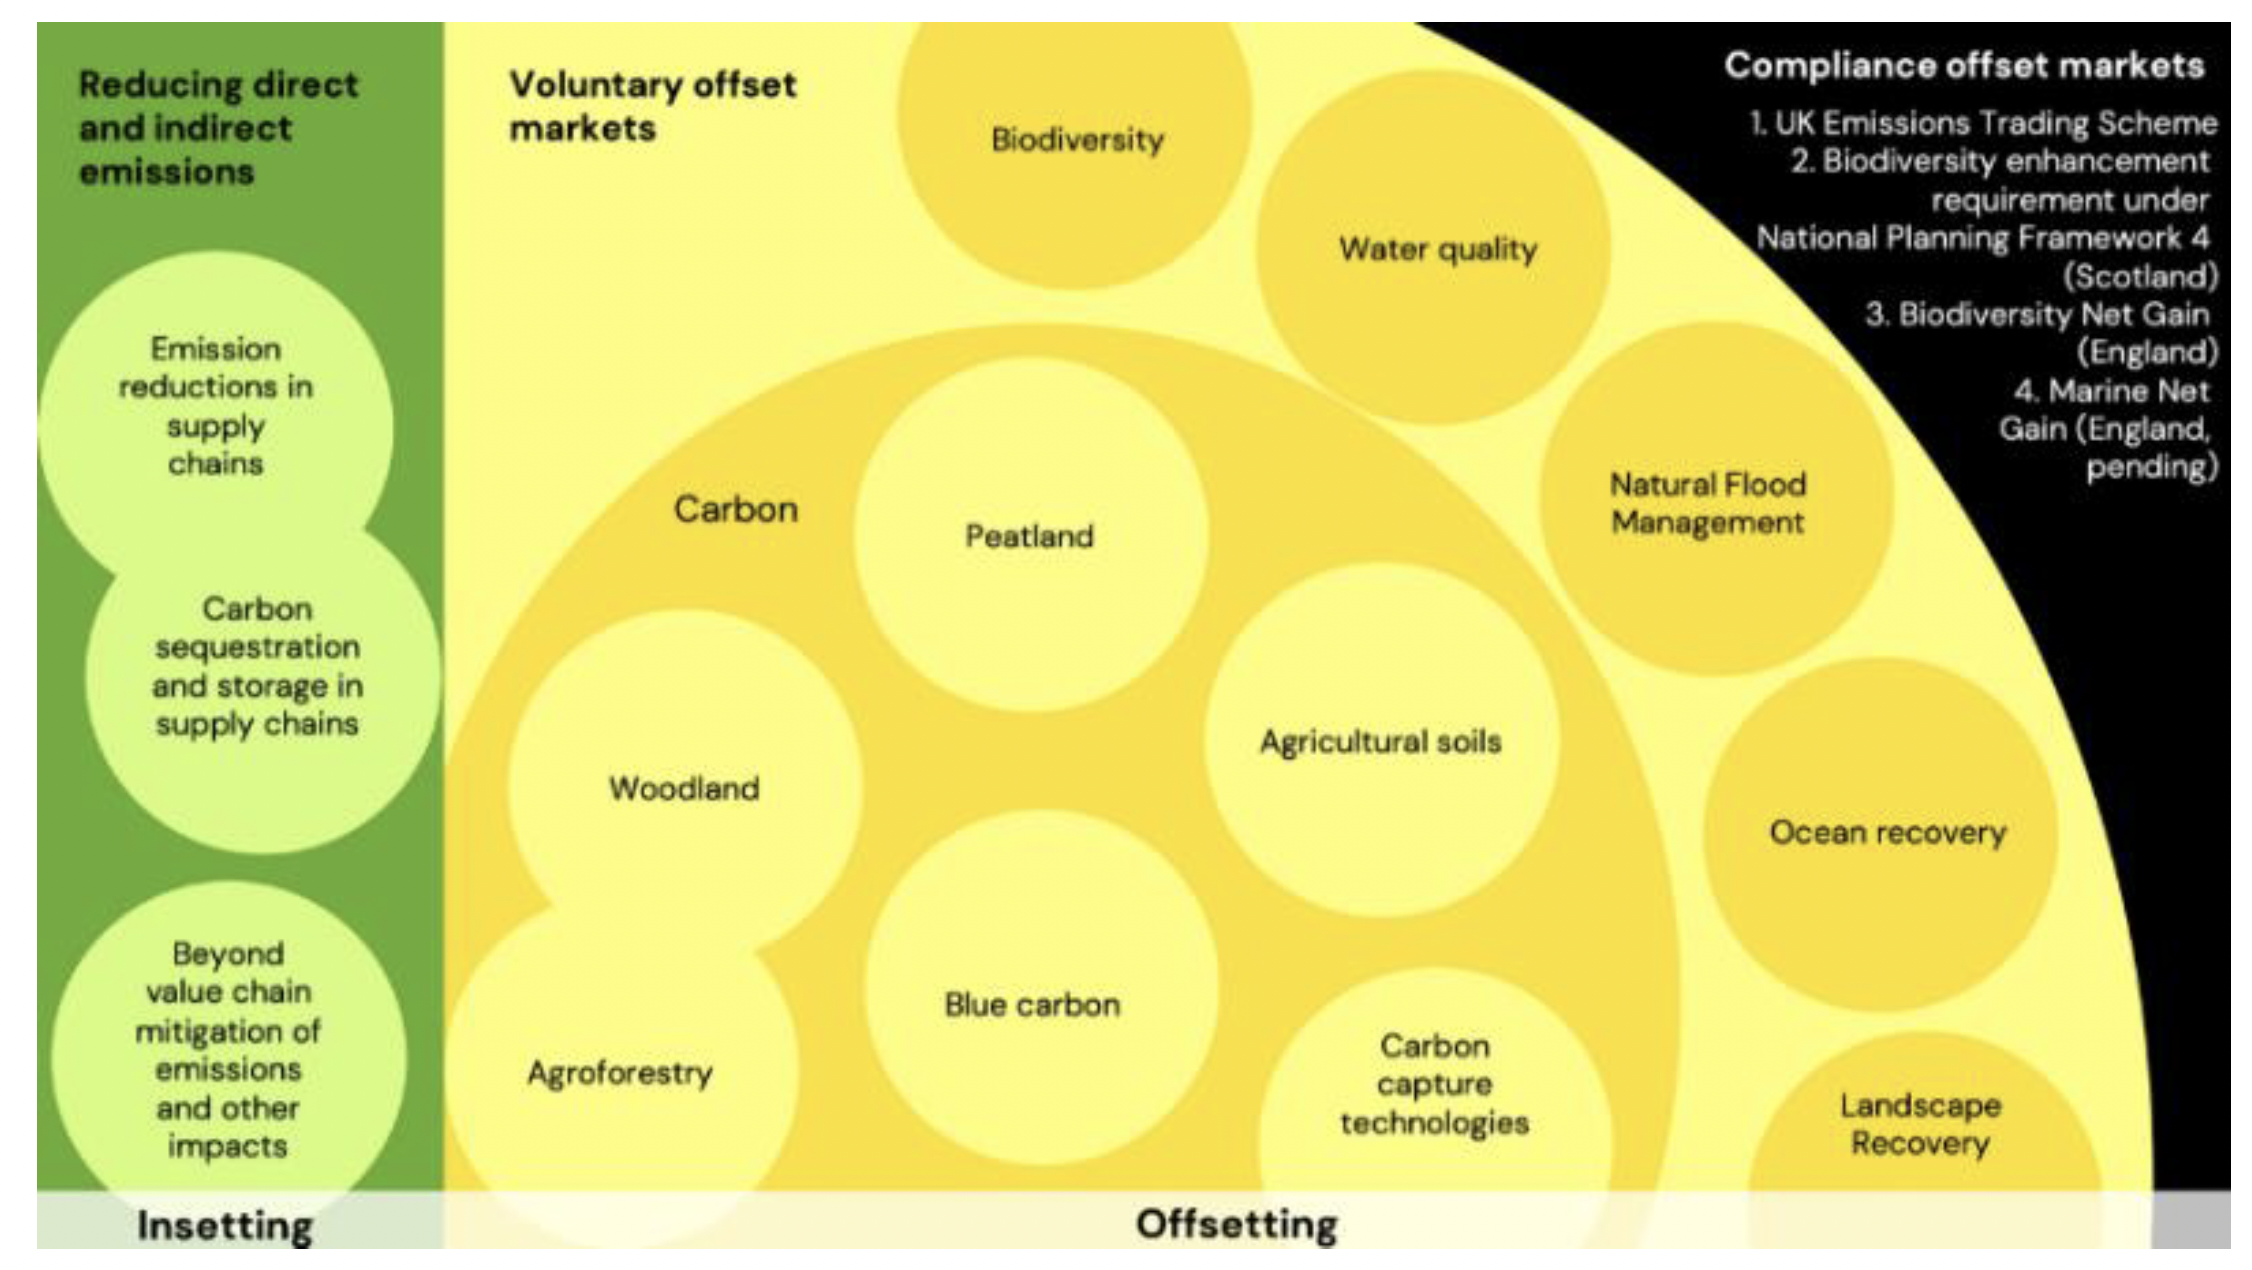 this diagram describes the types of insetting and offsetting markets in the UK (including those under development). For carbon, it includes: Peatland, agricultural soils, woodland, blue carbon, agroforestry, woodland and carbon capture technologies. For voluntary offset markets it includes: Biodiversity, water quality, natural flood management, ocean recovery, and landscape recovery. For compliance offset markets it includes: UK Emissions Trading Scheme, Biodiversity enhancement requirements under National Planning Framework 4 (Scotland), Biodiversity Net Gain (England), Marine net gain (England, pending). For insetting: Emissions reduction in the support chain, carbon sequestration and storage in supply chain, beyond value chain mitigation of emissions and other impacts.